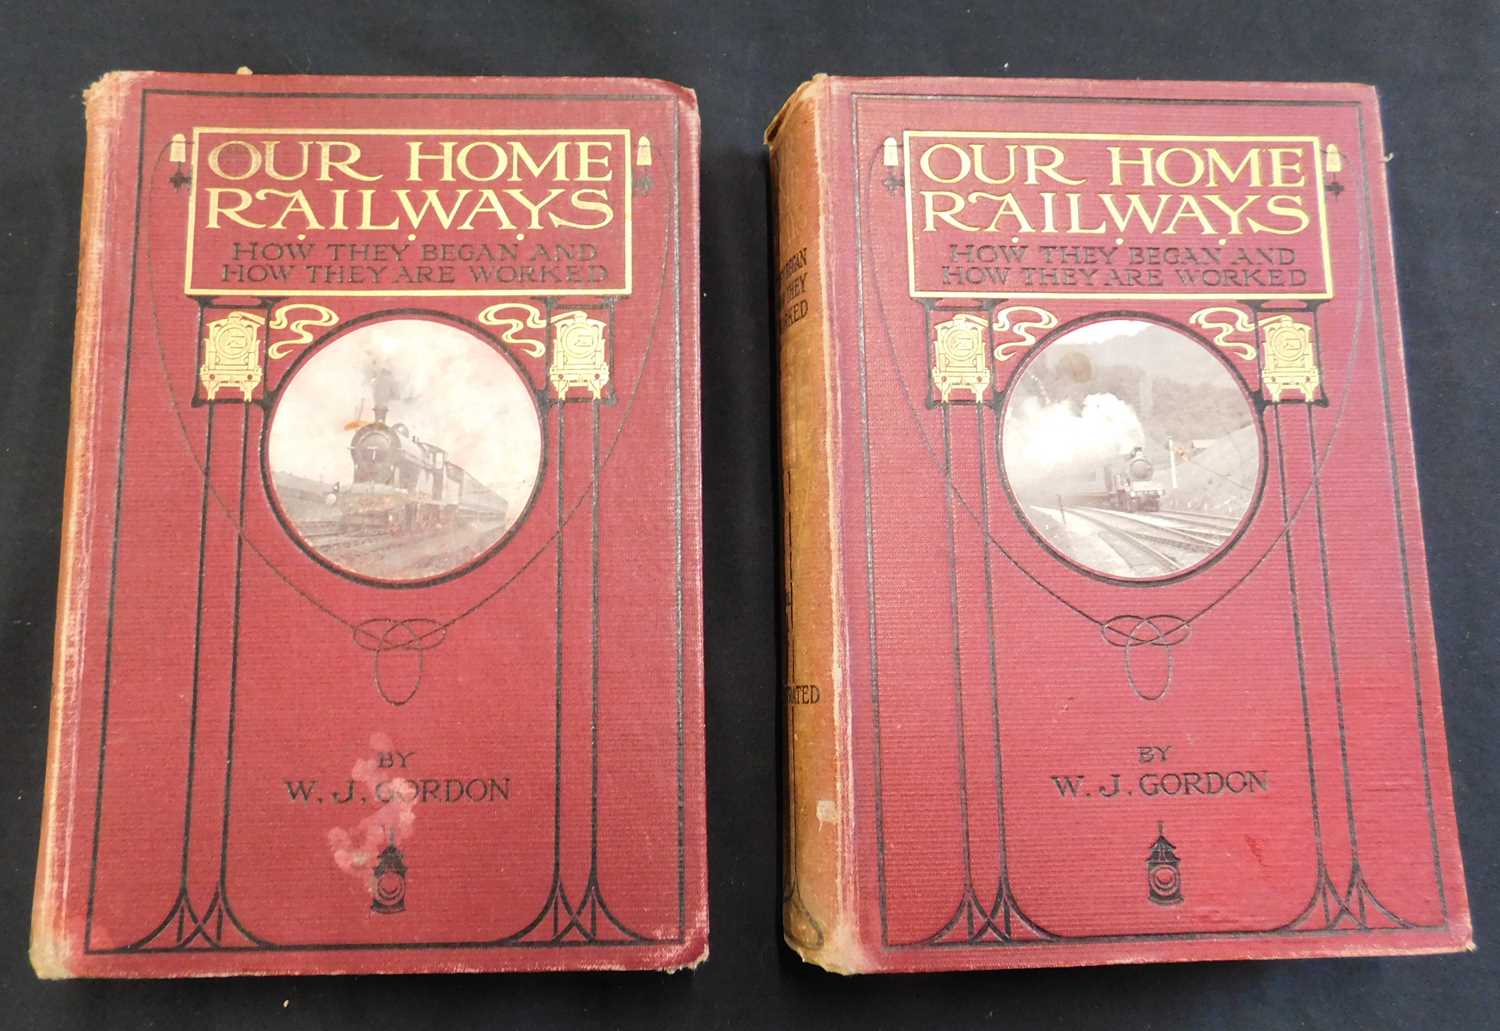 W J GORDON: OUR HOME RAILWAYS, HOW THEY BEGAN AND HOW THEY ARE WORKED, London, Frederick Warne,